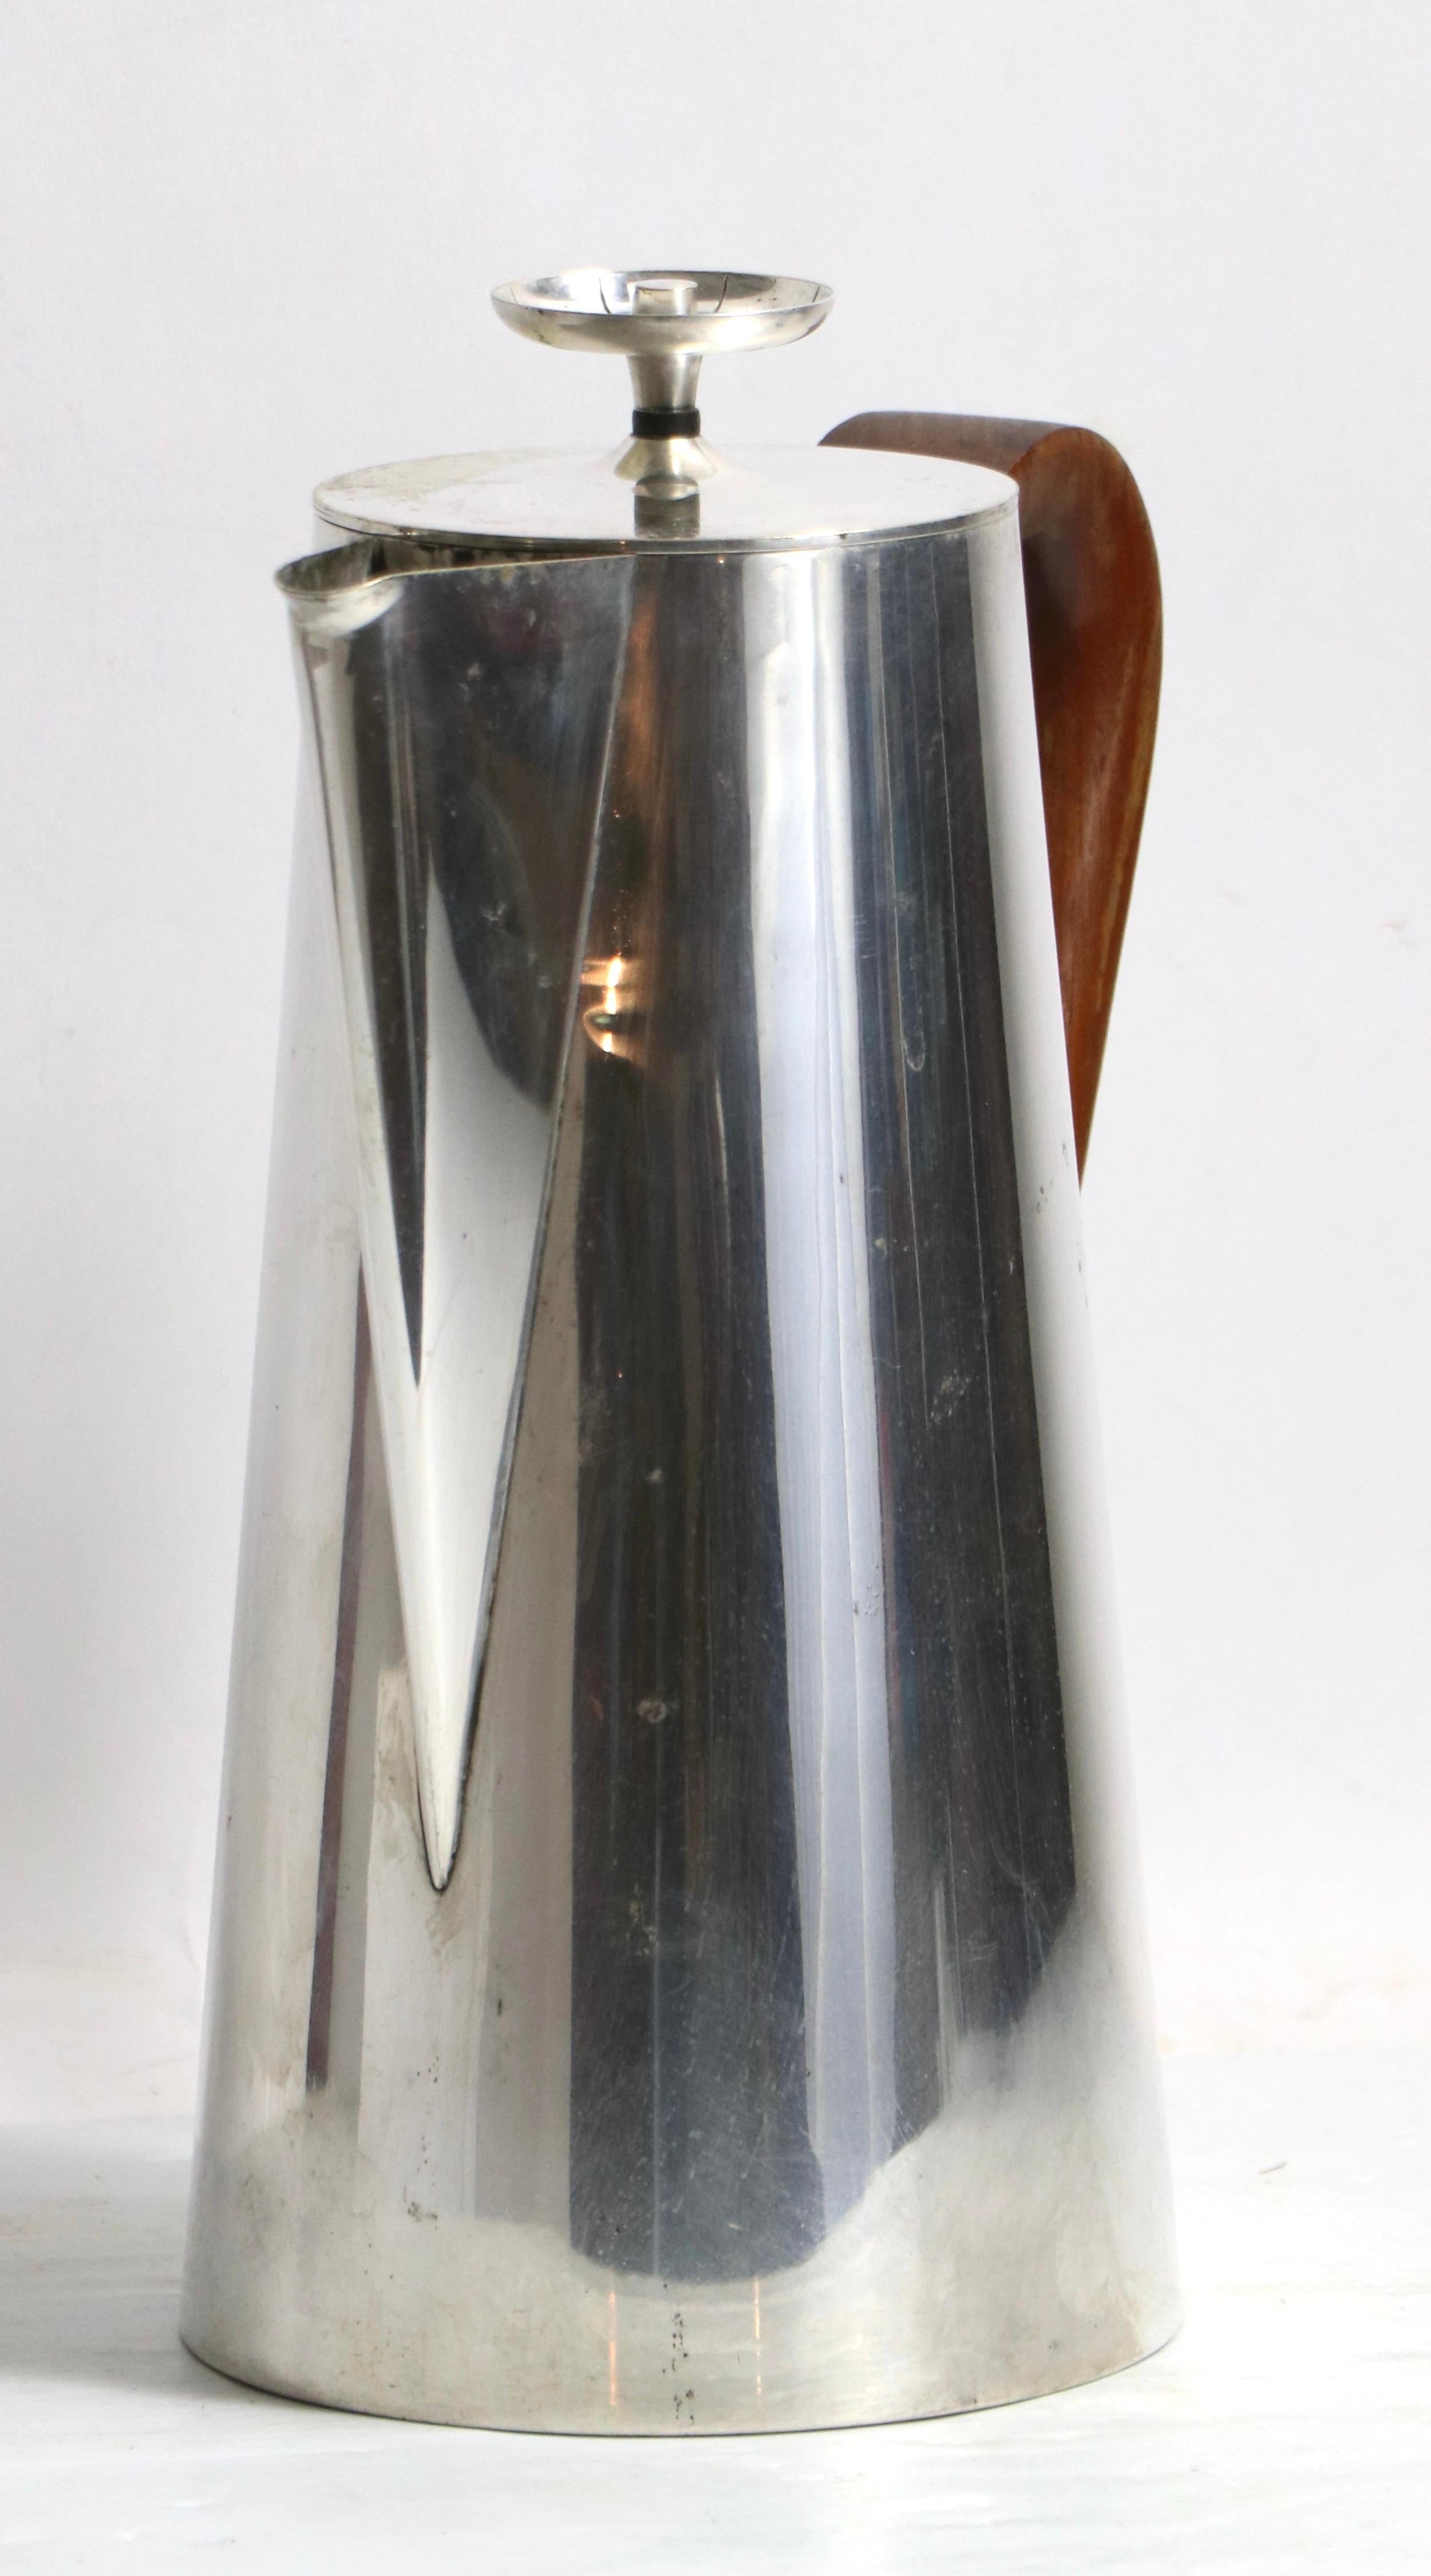 Classic Parzinger design nickel plated coffee pot, with sculpted solid walnut handle. This example is in overall good condition, the top shows some loss of plating, please see images.